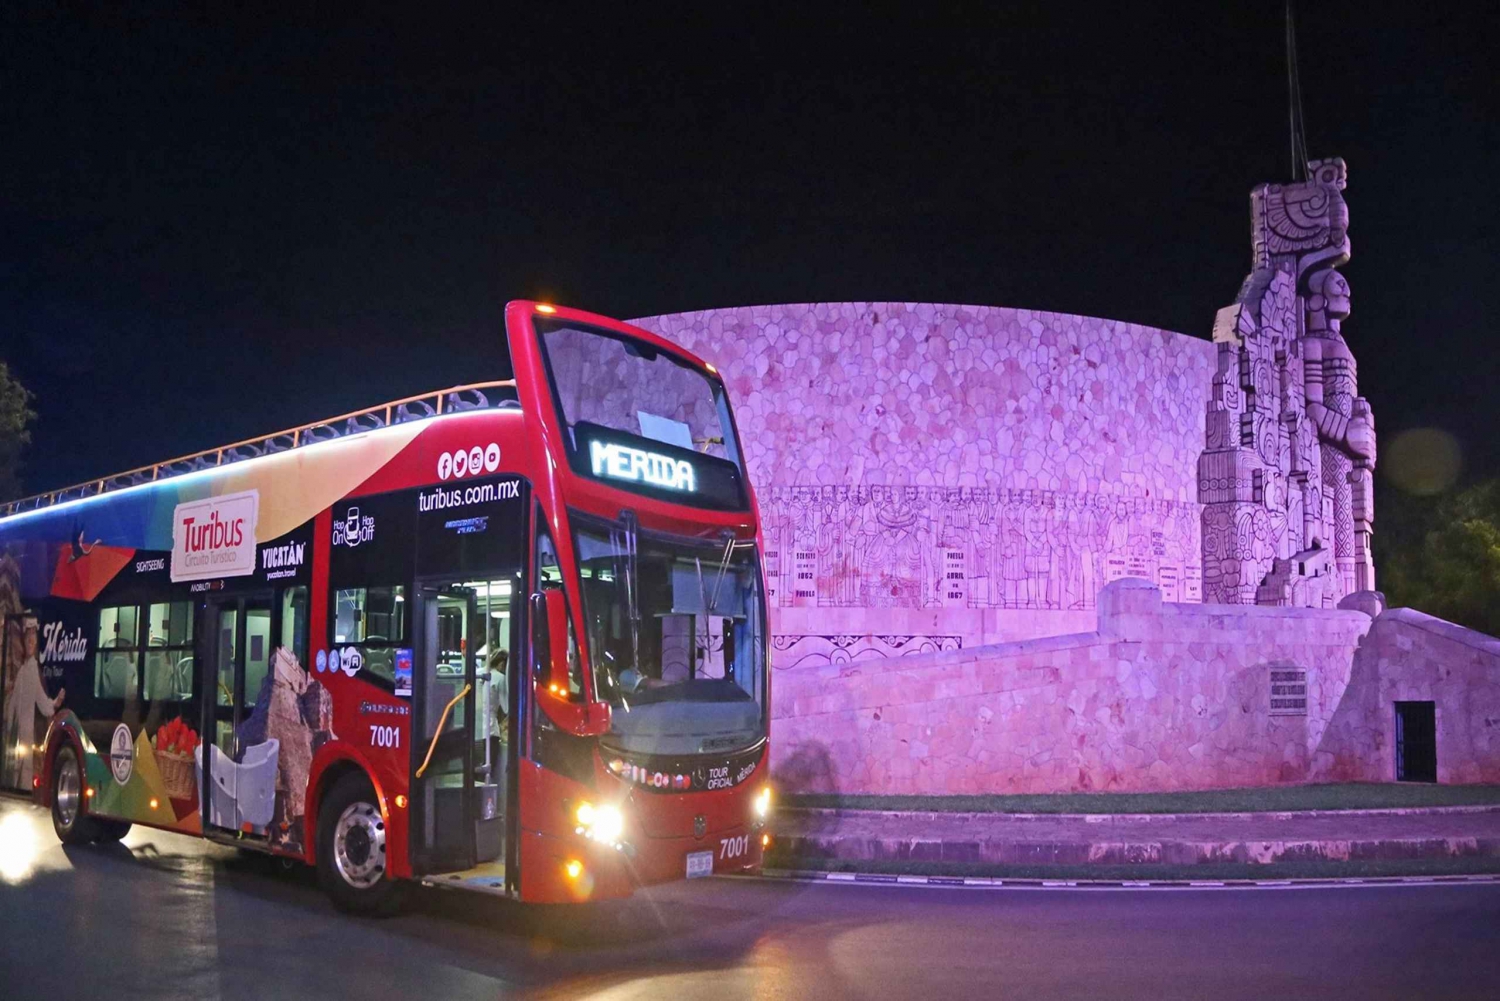 Mérida: Panoramic Sightseeing Tour Bus Ticket with 2 Routes